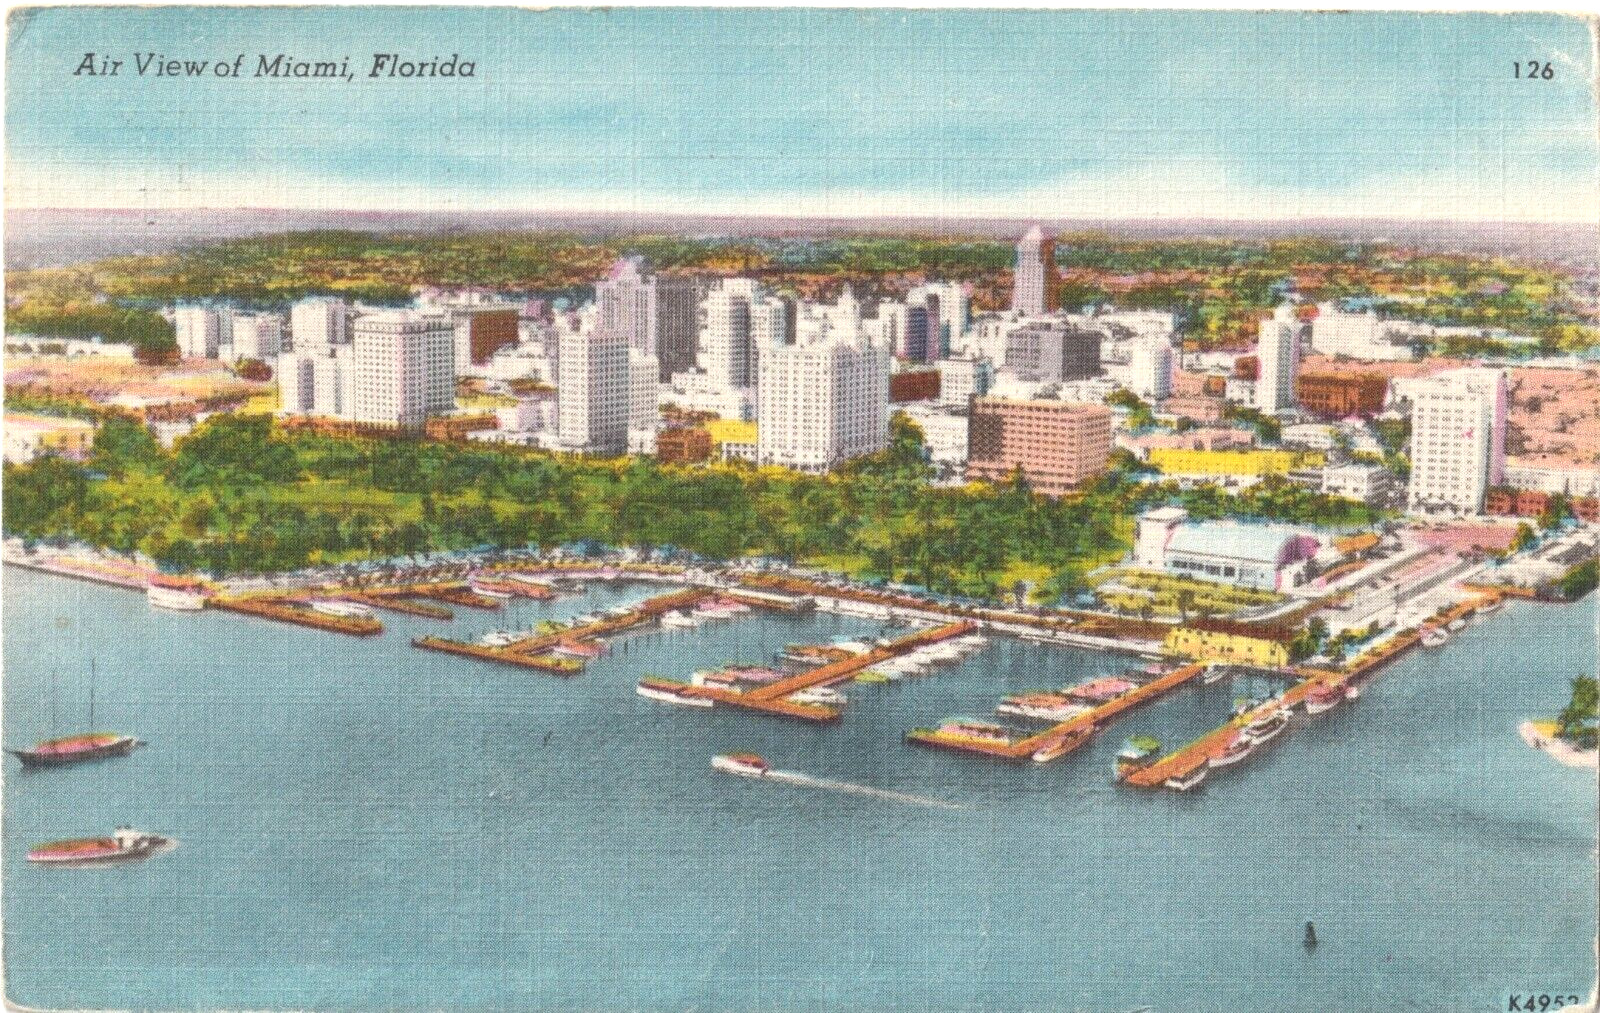 Air View of Miami, Florida FL-Hotels and Yacht Basin-1954 posted postcard